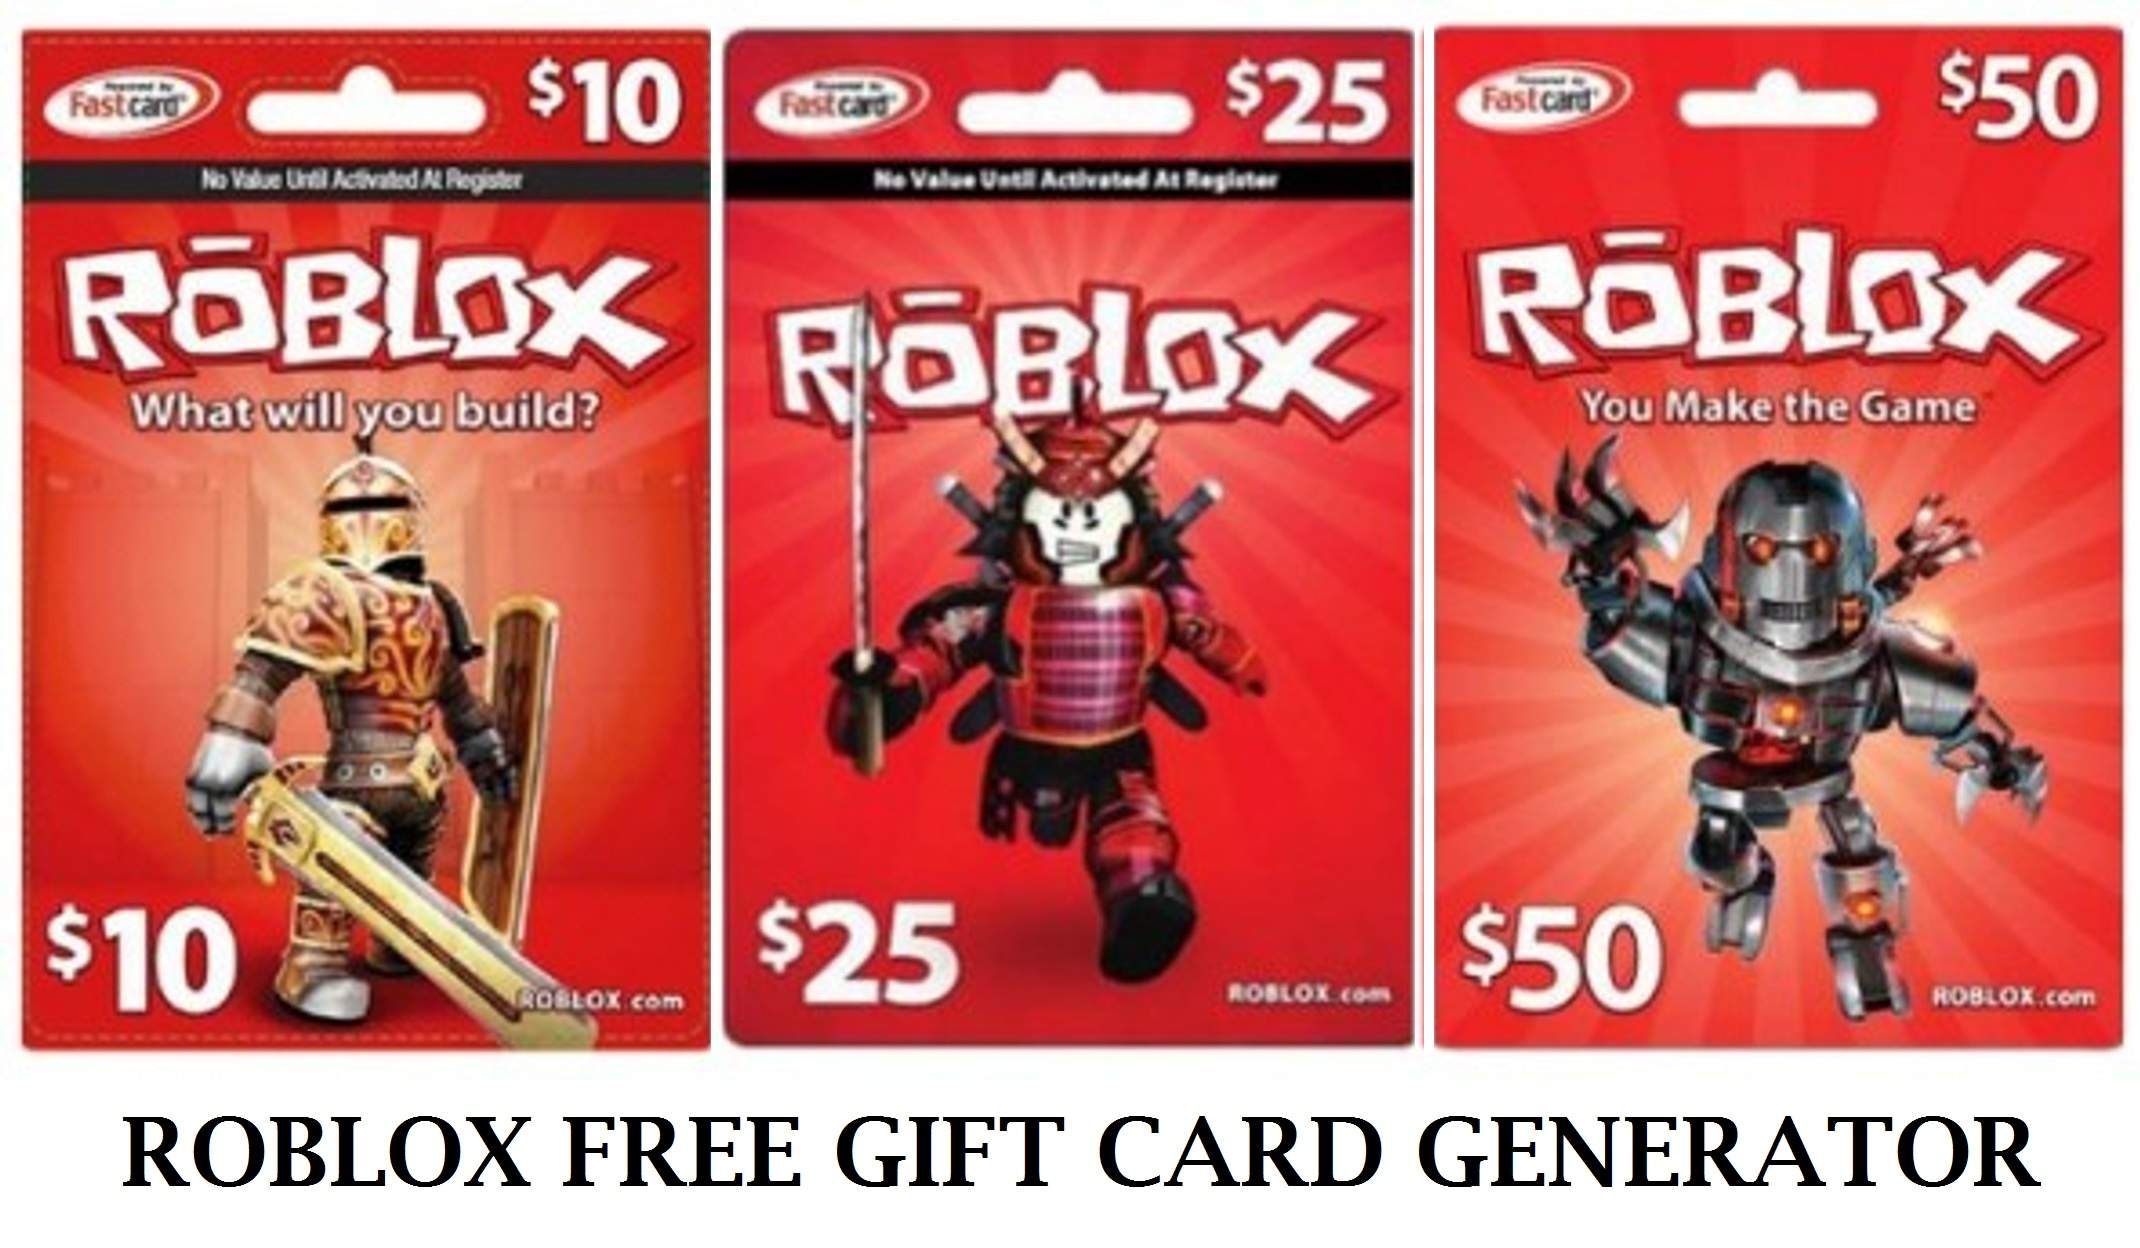 Roblox Free Gift Card Codes Generator Without Human Verification Buyfreeecoupons - roblox gift code generator 2017 gift ftempo wallpaperzenorg